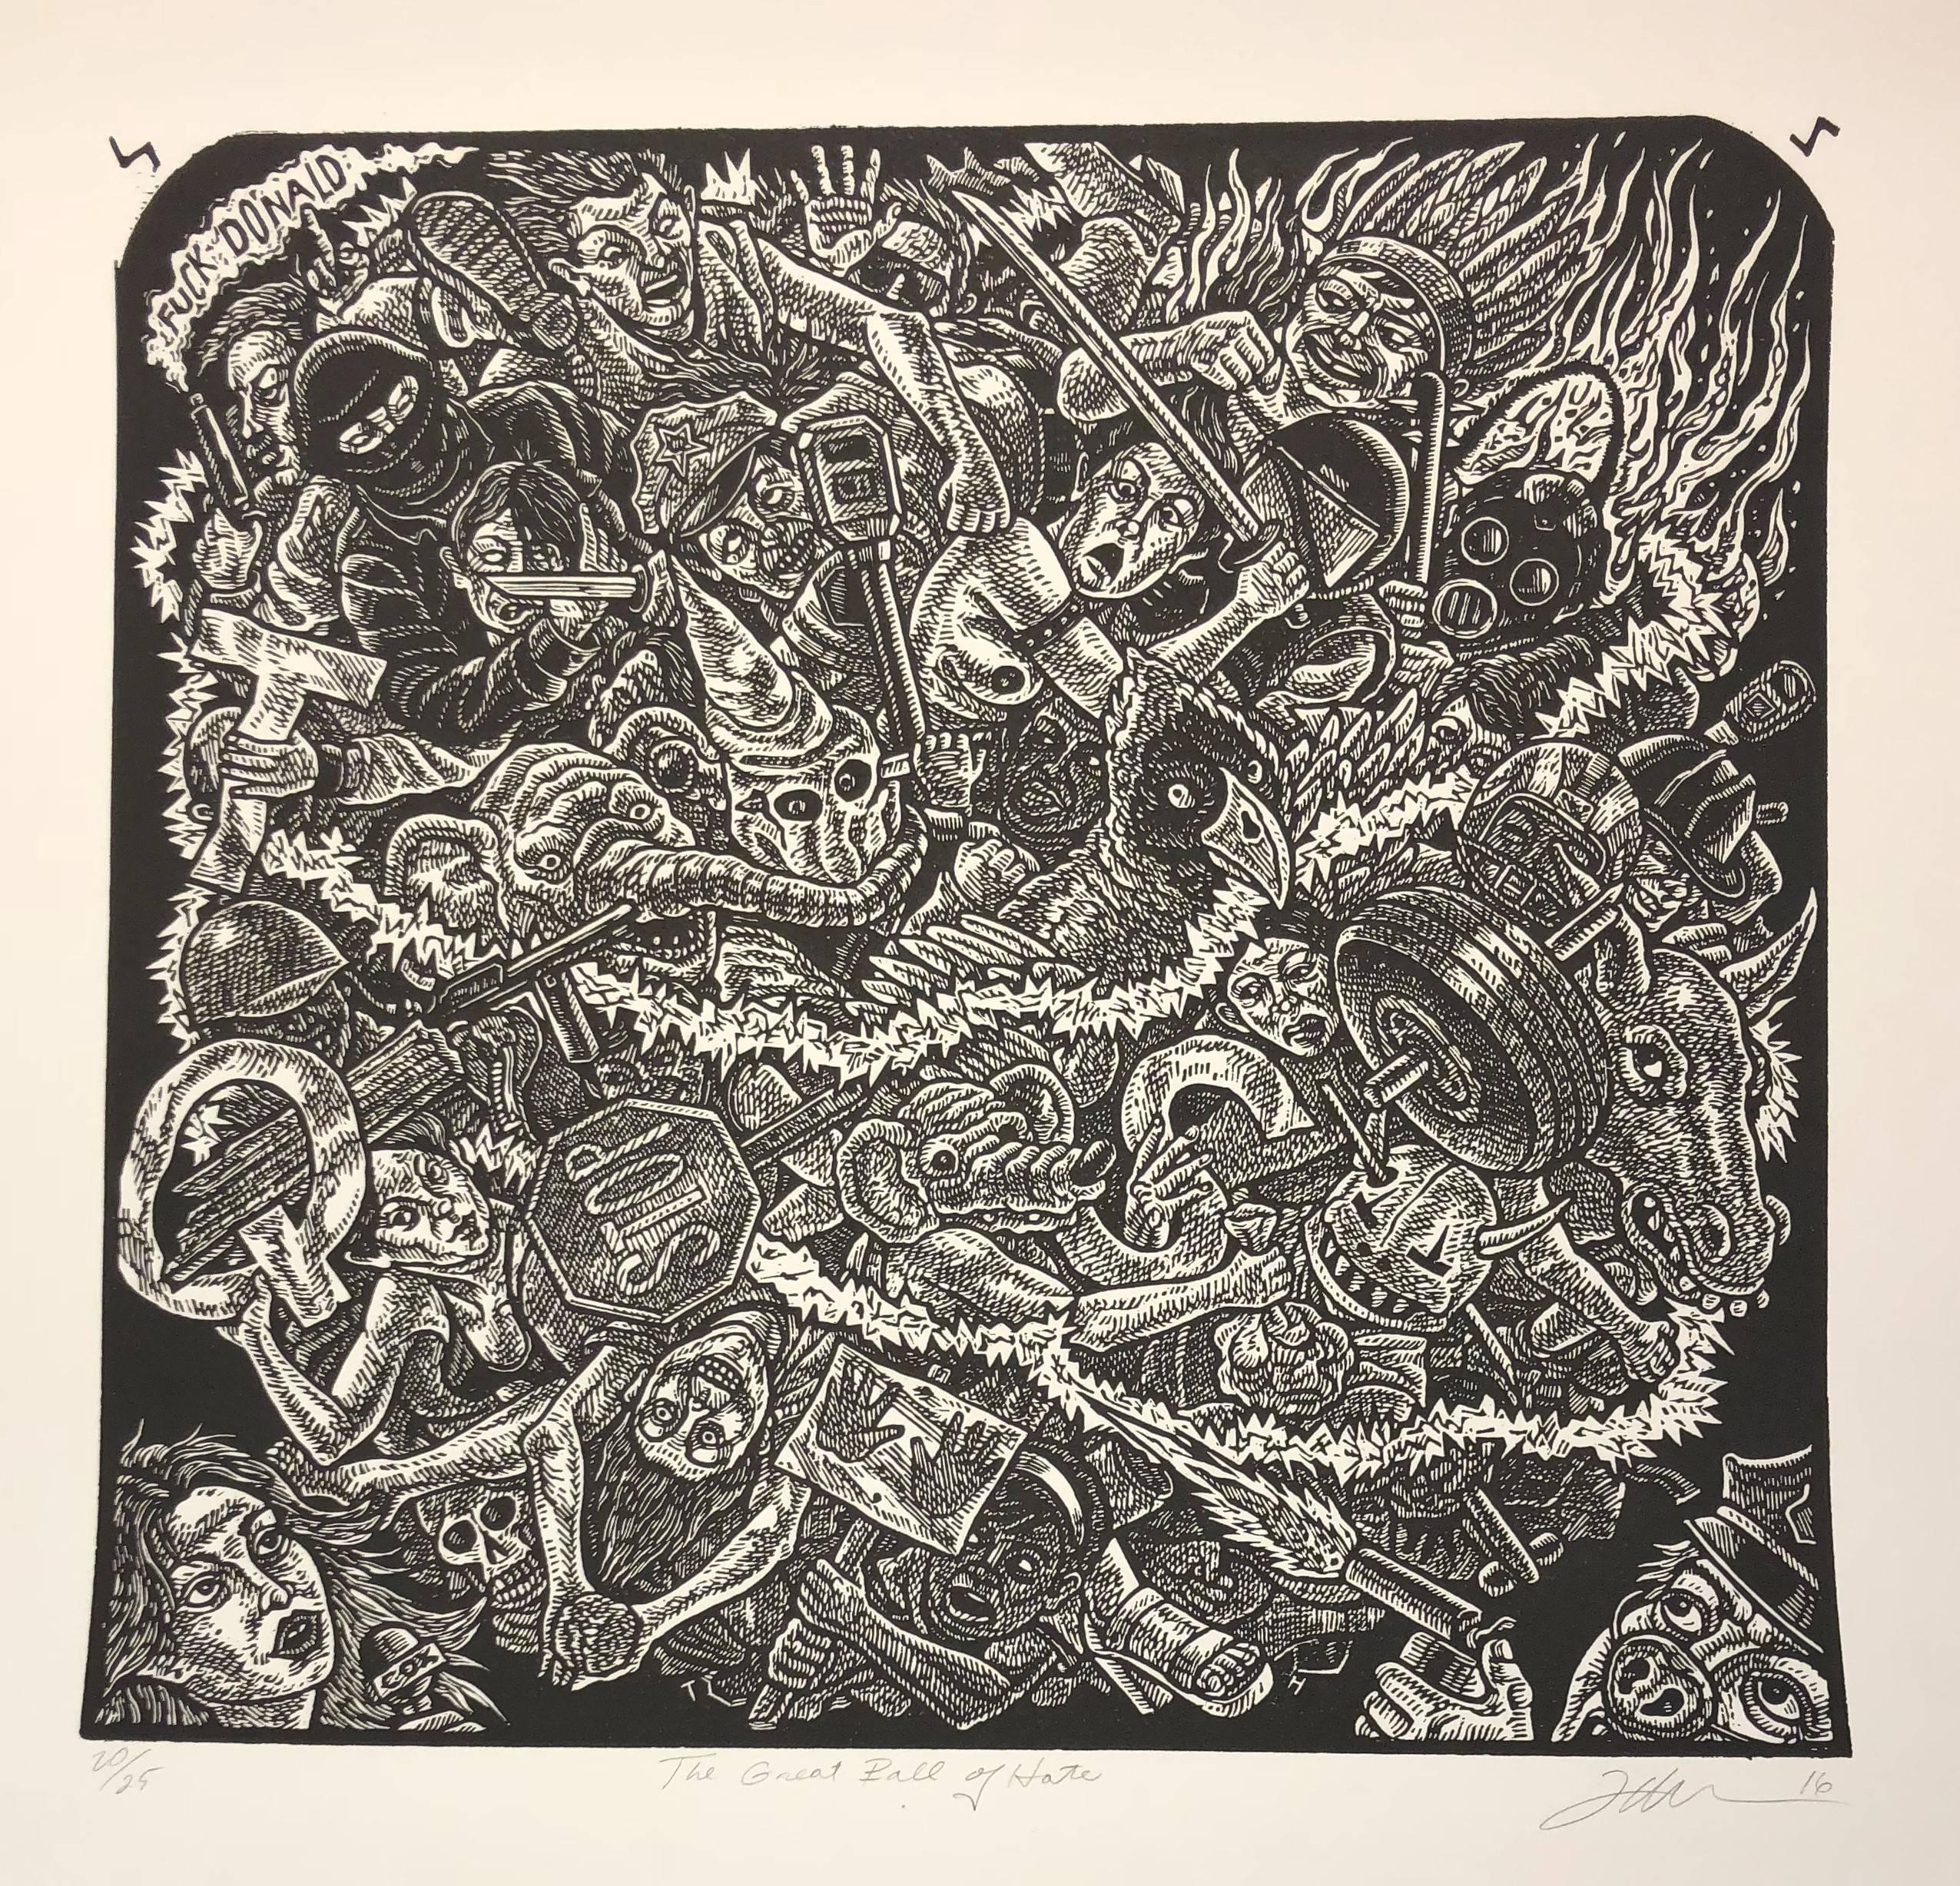 Three Scenes from a Tiny Riot - Set of Three Woodcut Prints by Tom Huck